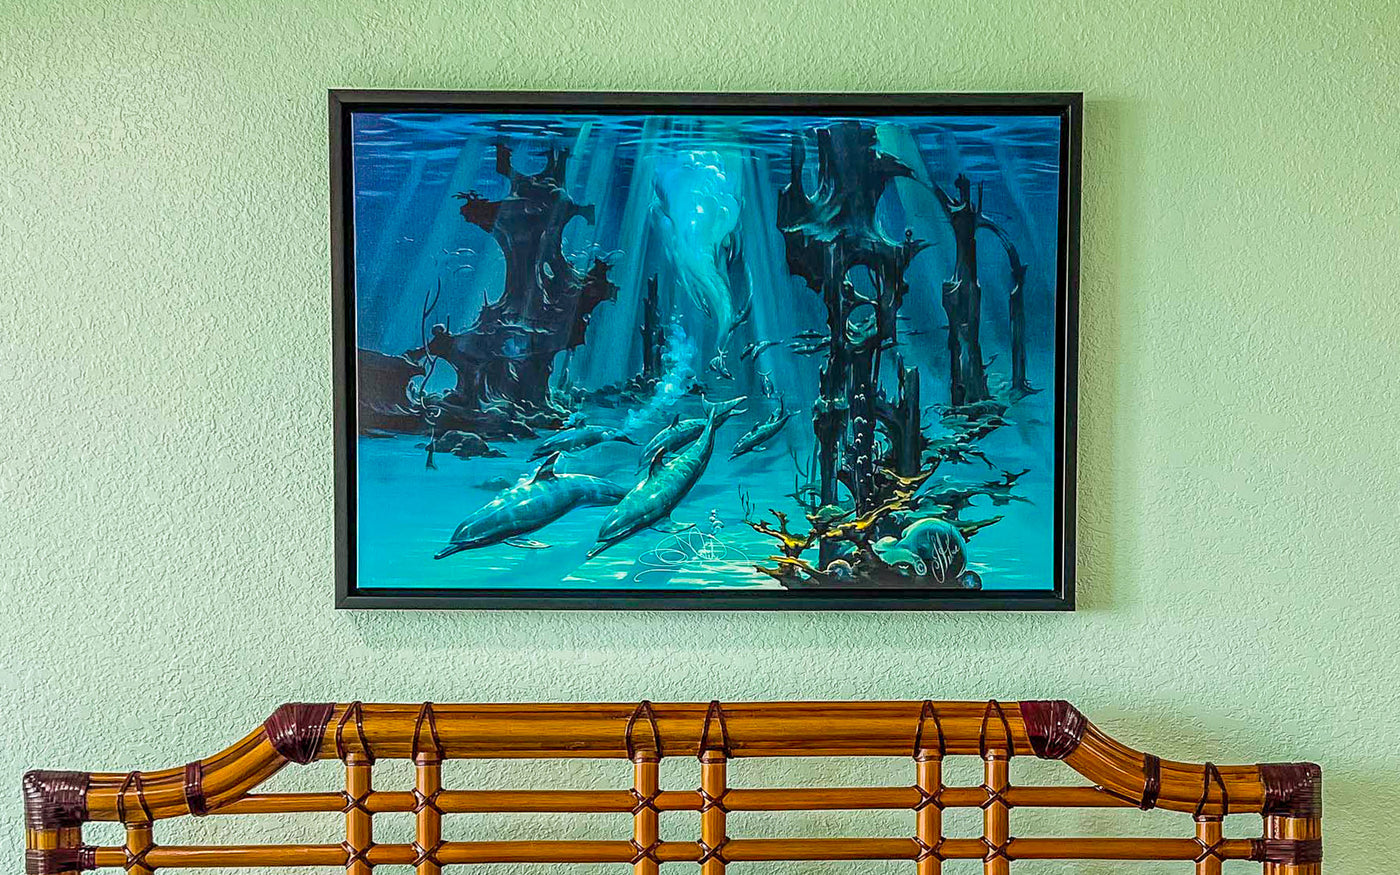 Atlantis Dolphins is an oil on canvas by John Pitre. It depicts a surreal adventure into the remnants of another place and time as seen through the mind and eyes of the dolphin.